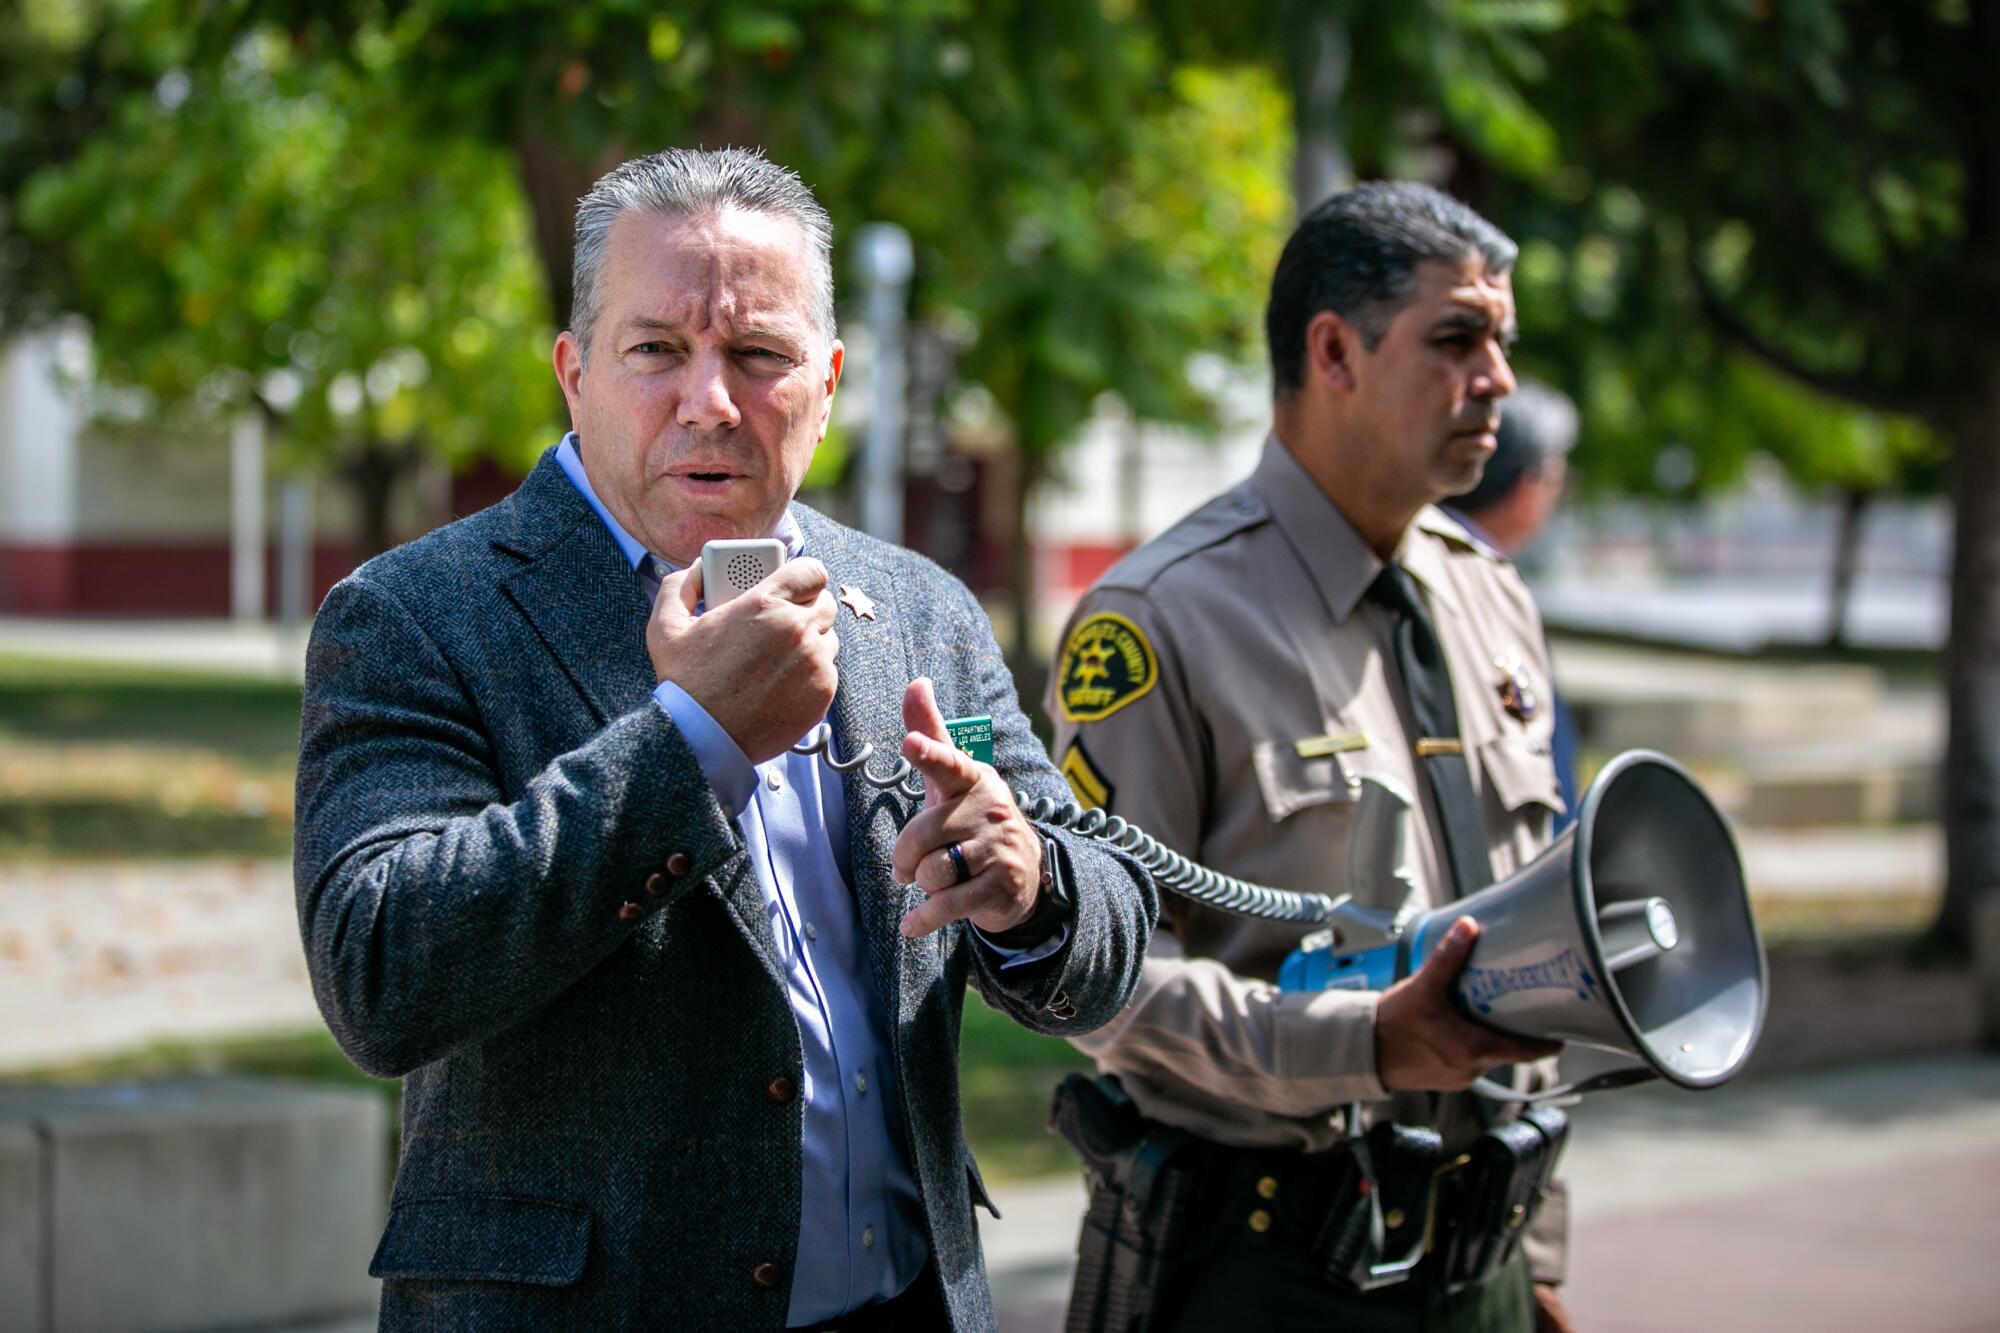 Sheriff Alex Villanueva, left, holding a microphone as another deputy holds a speaker